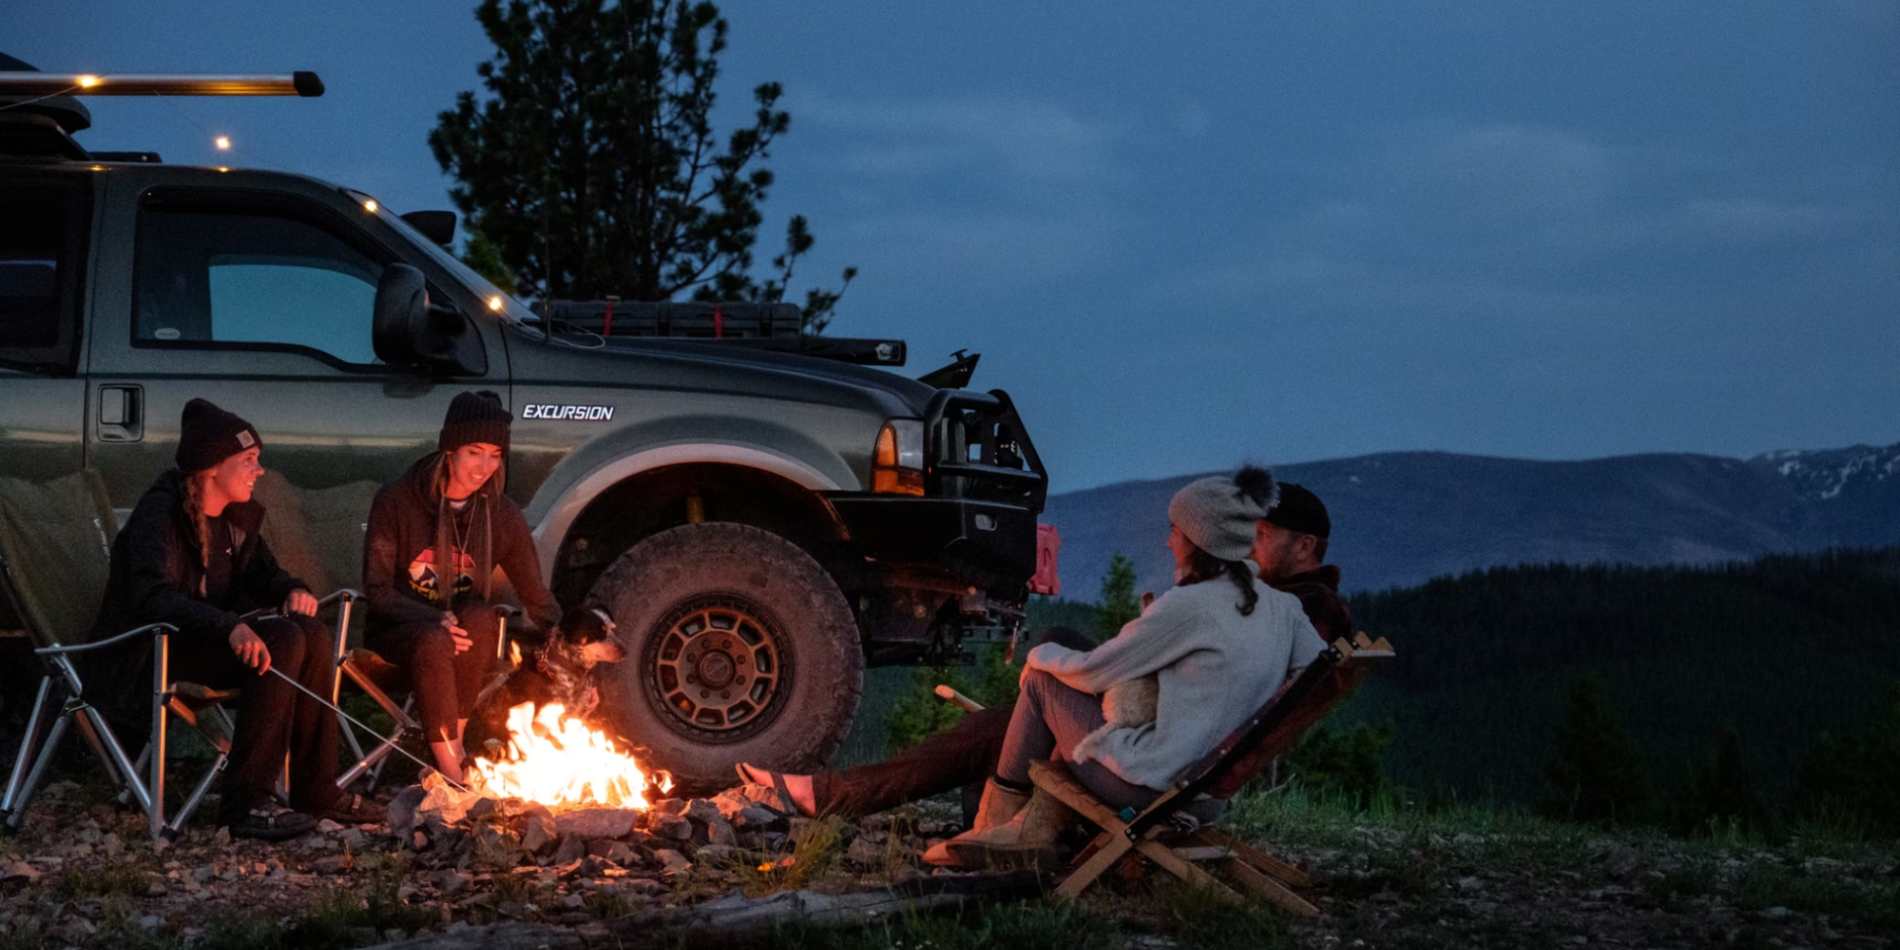 A group of buddies just chilling and sitting around the campfire during their overlanding trip